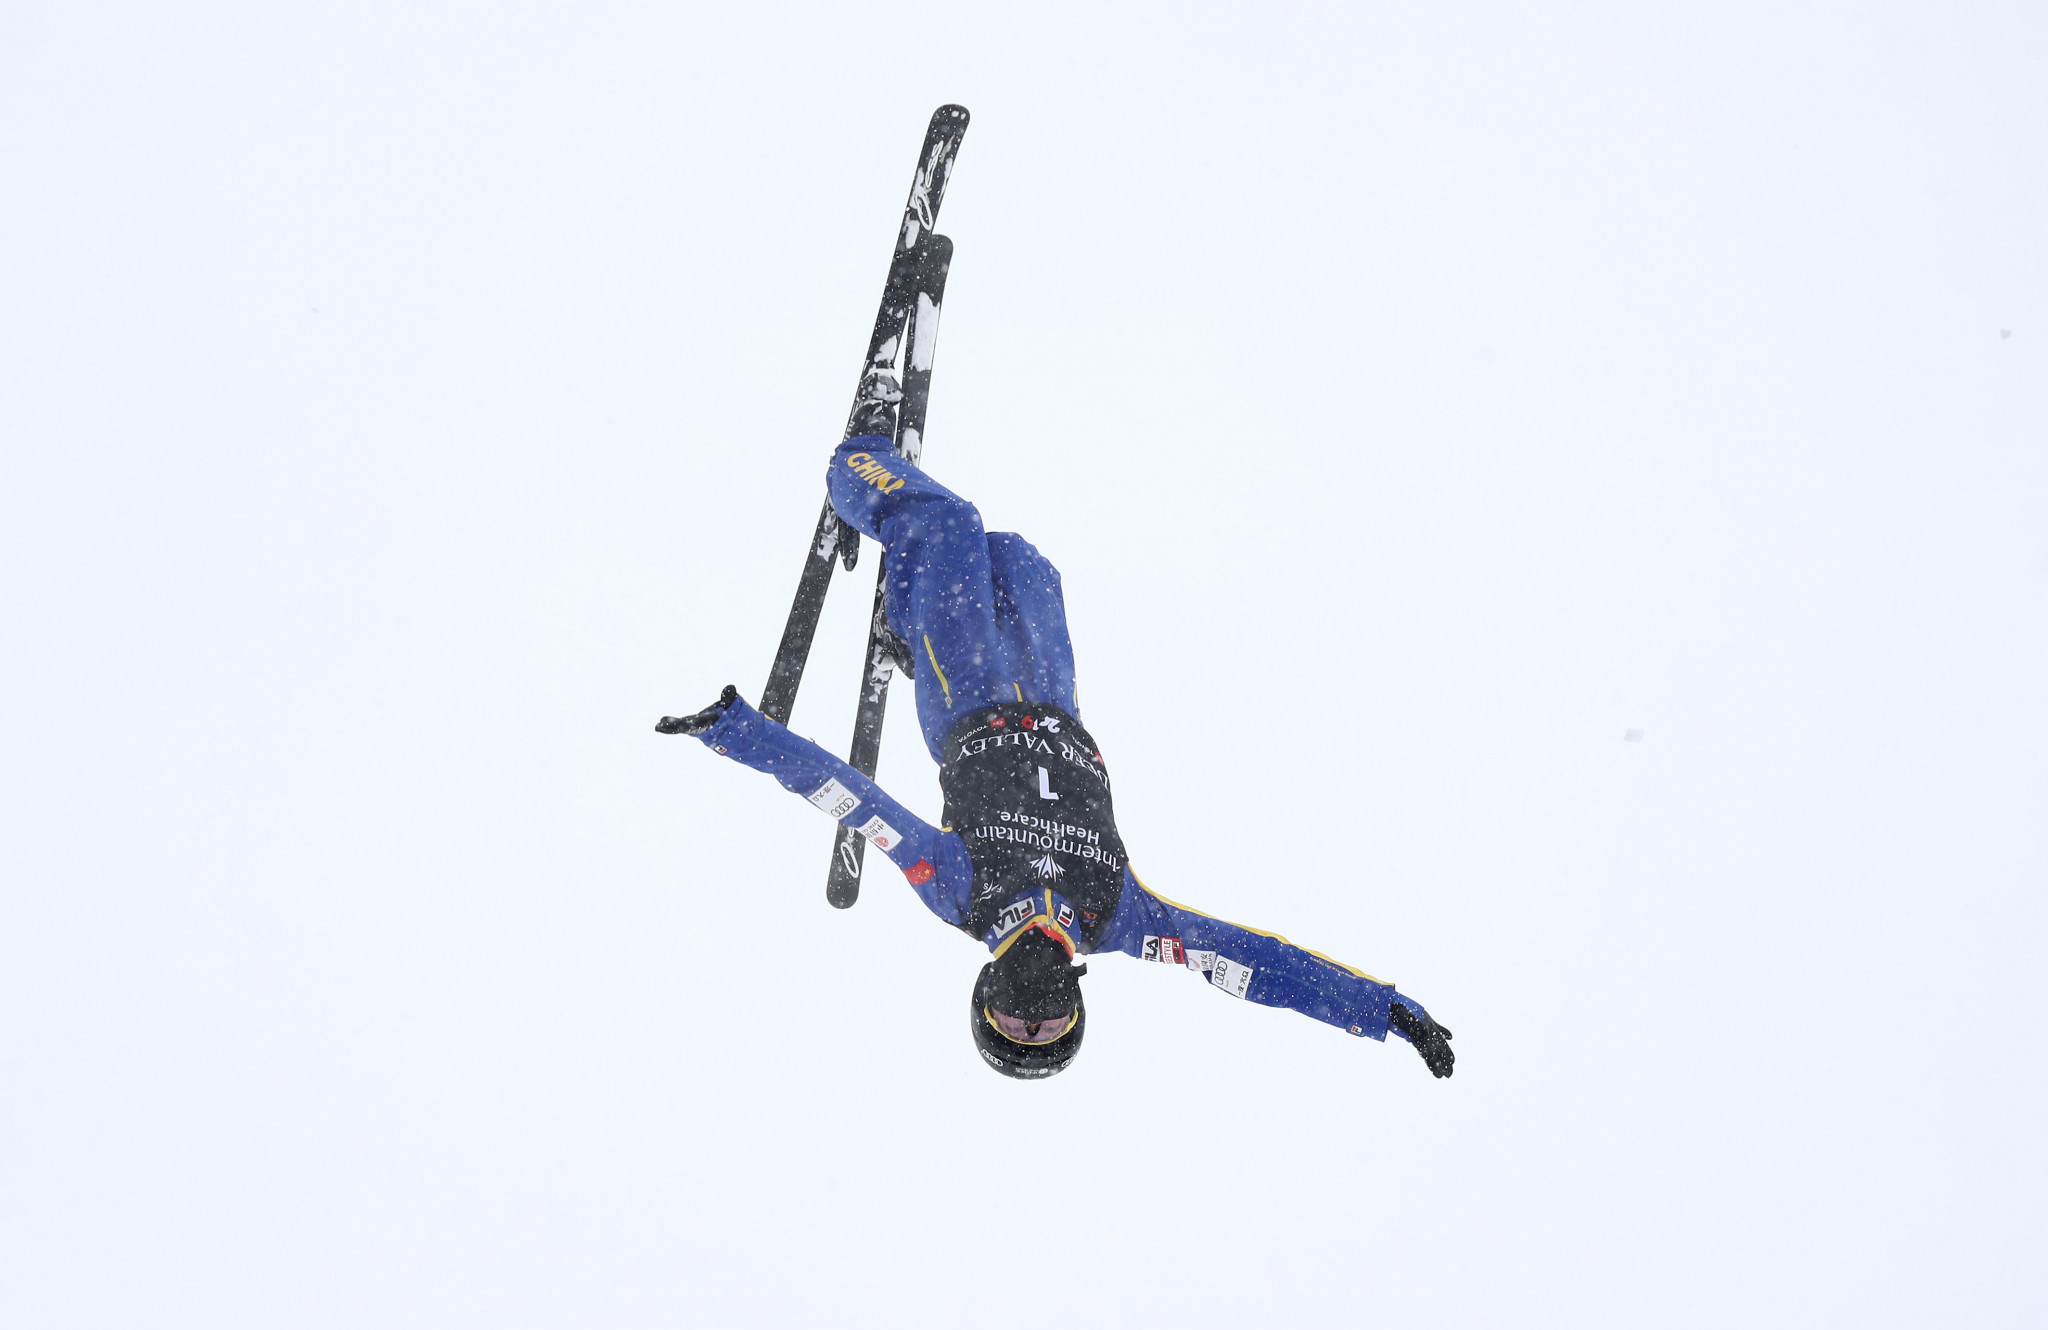 Xu looks to extend Aerials World Cup lead in front of home crowd on Shimao Lotus Mountain